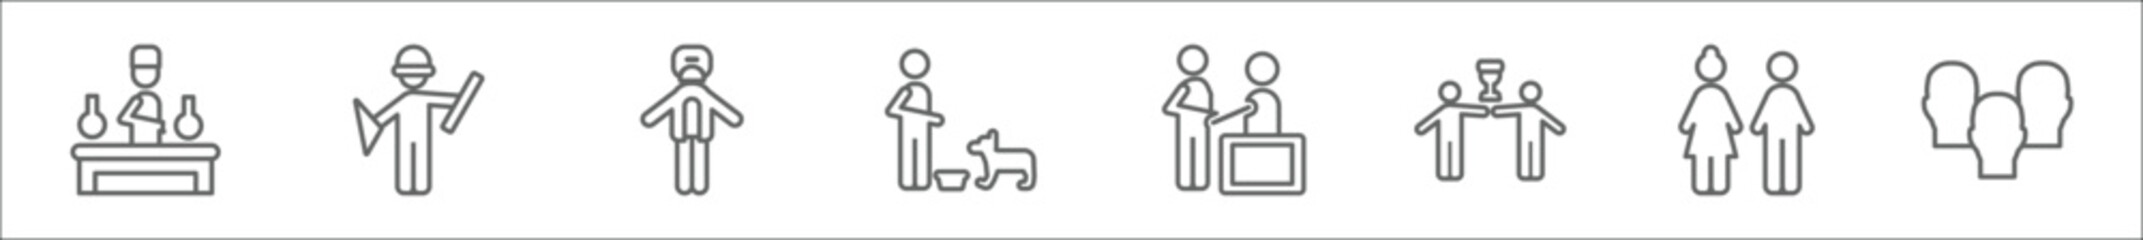 outline set of people line icons. linear vector icons such as chemist working, architech working, protective suit, feeding a dog, sculptor working, succes team, woman and man partners, heads